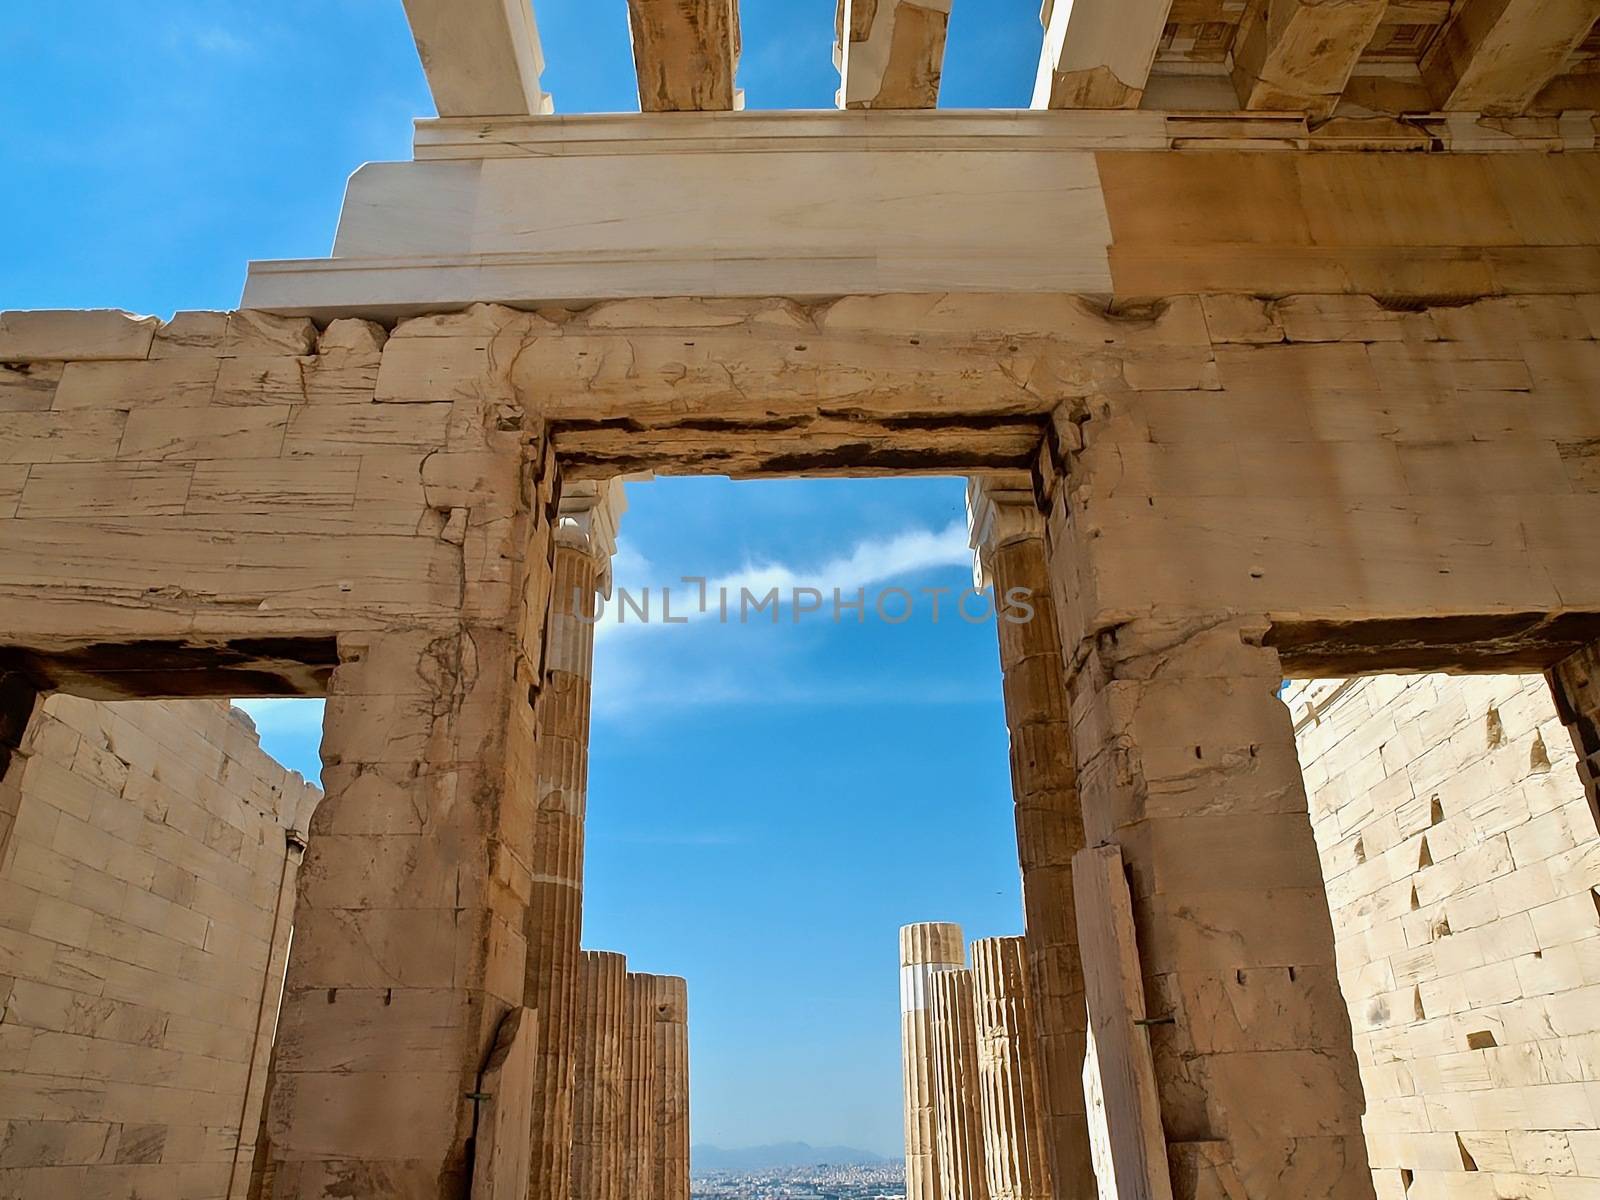 Temple of the famous Acropolis in Athens in Greece